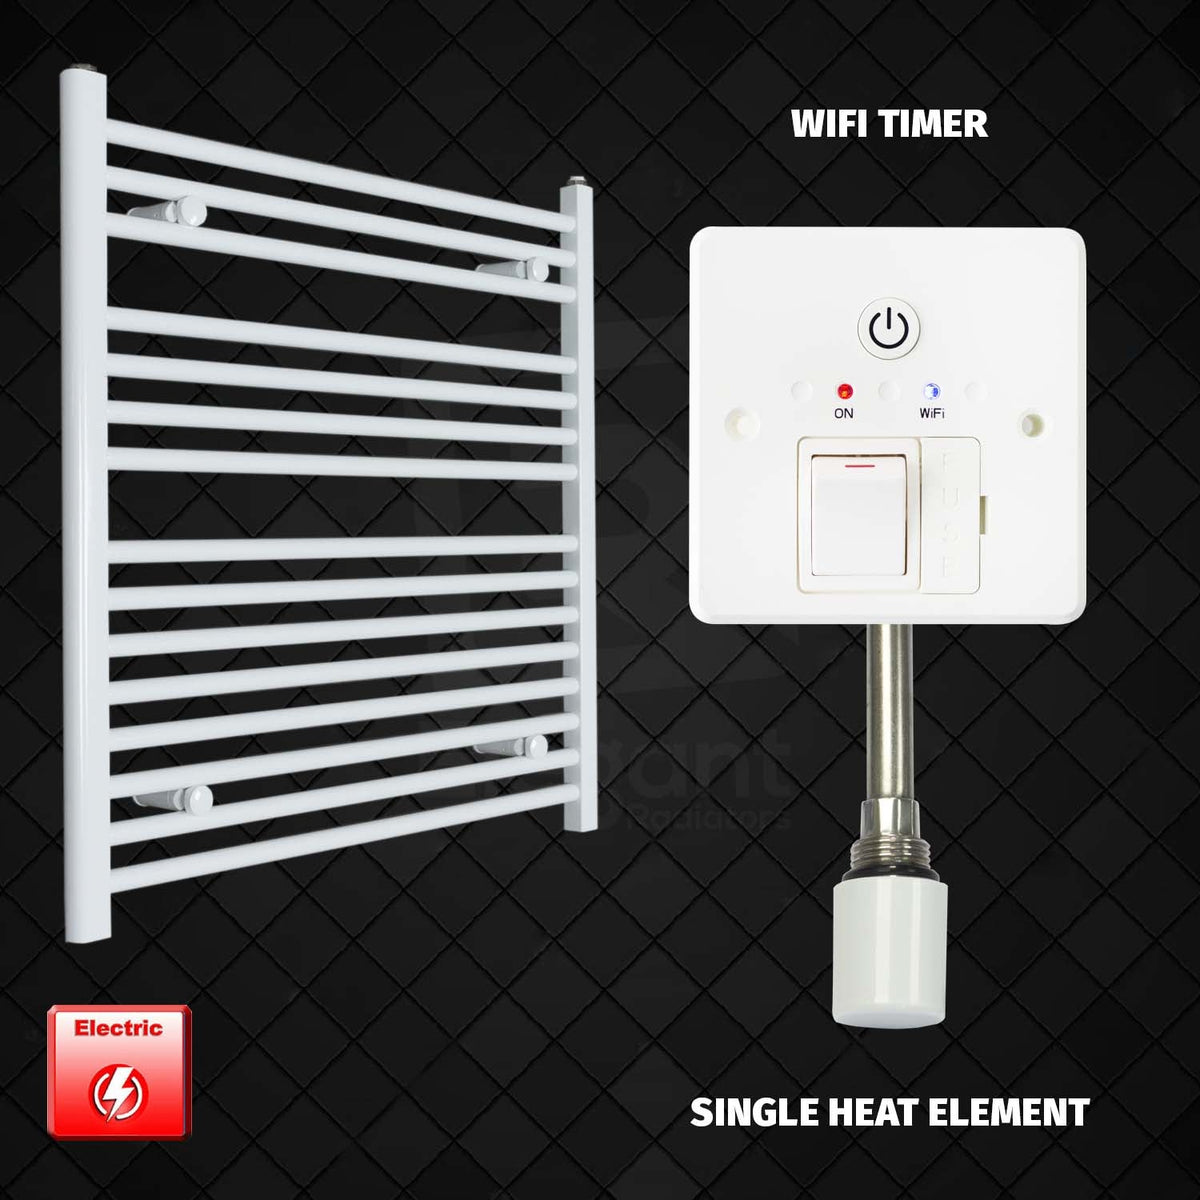 800 x 900 Pre-Filled Electric Heated Towel Radiator White HTR Single heat element Wifi timer